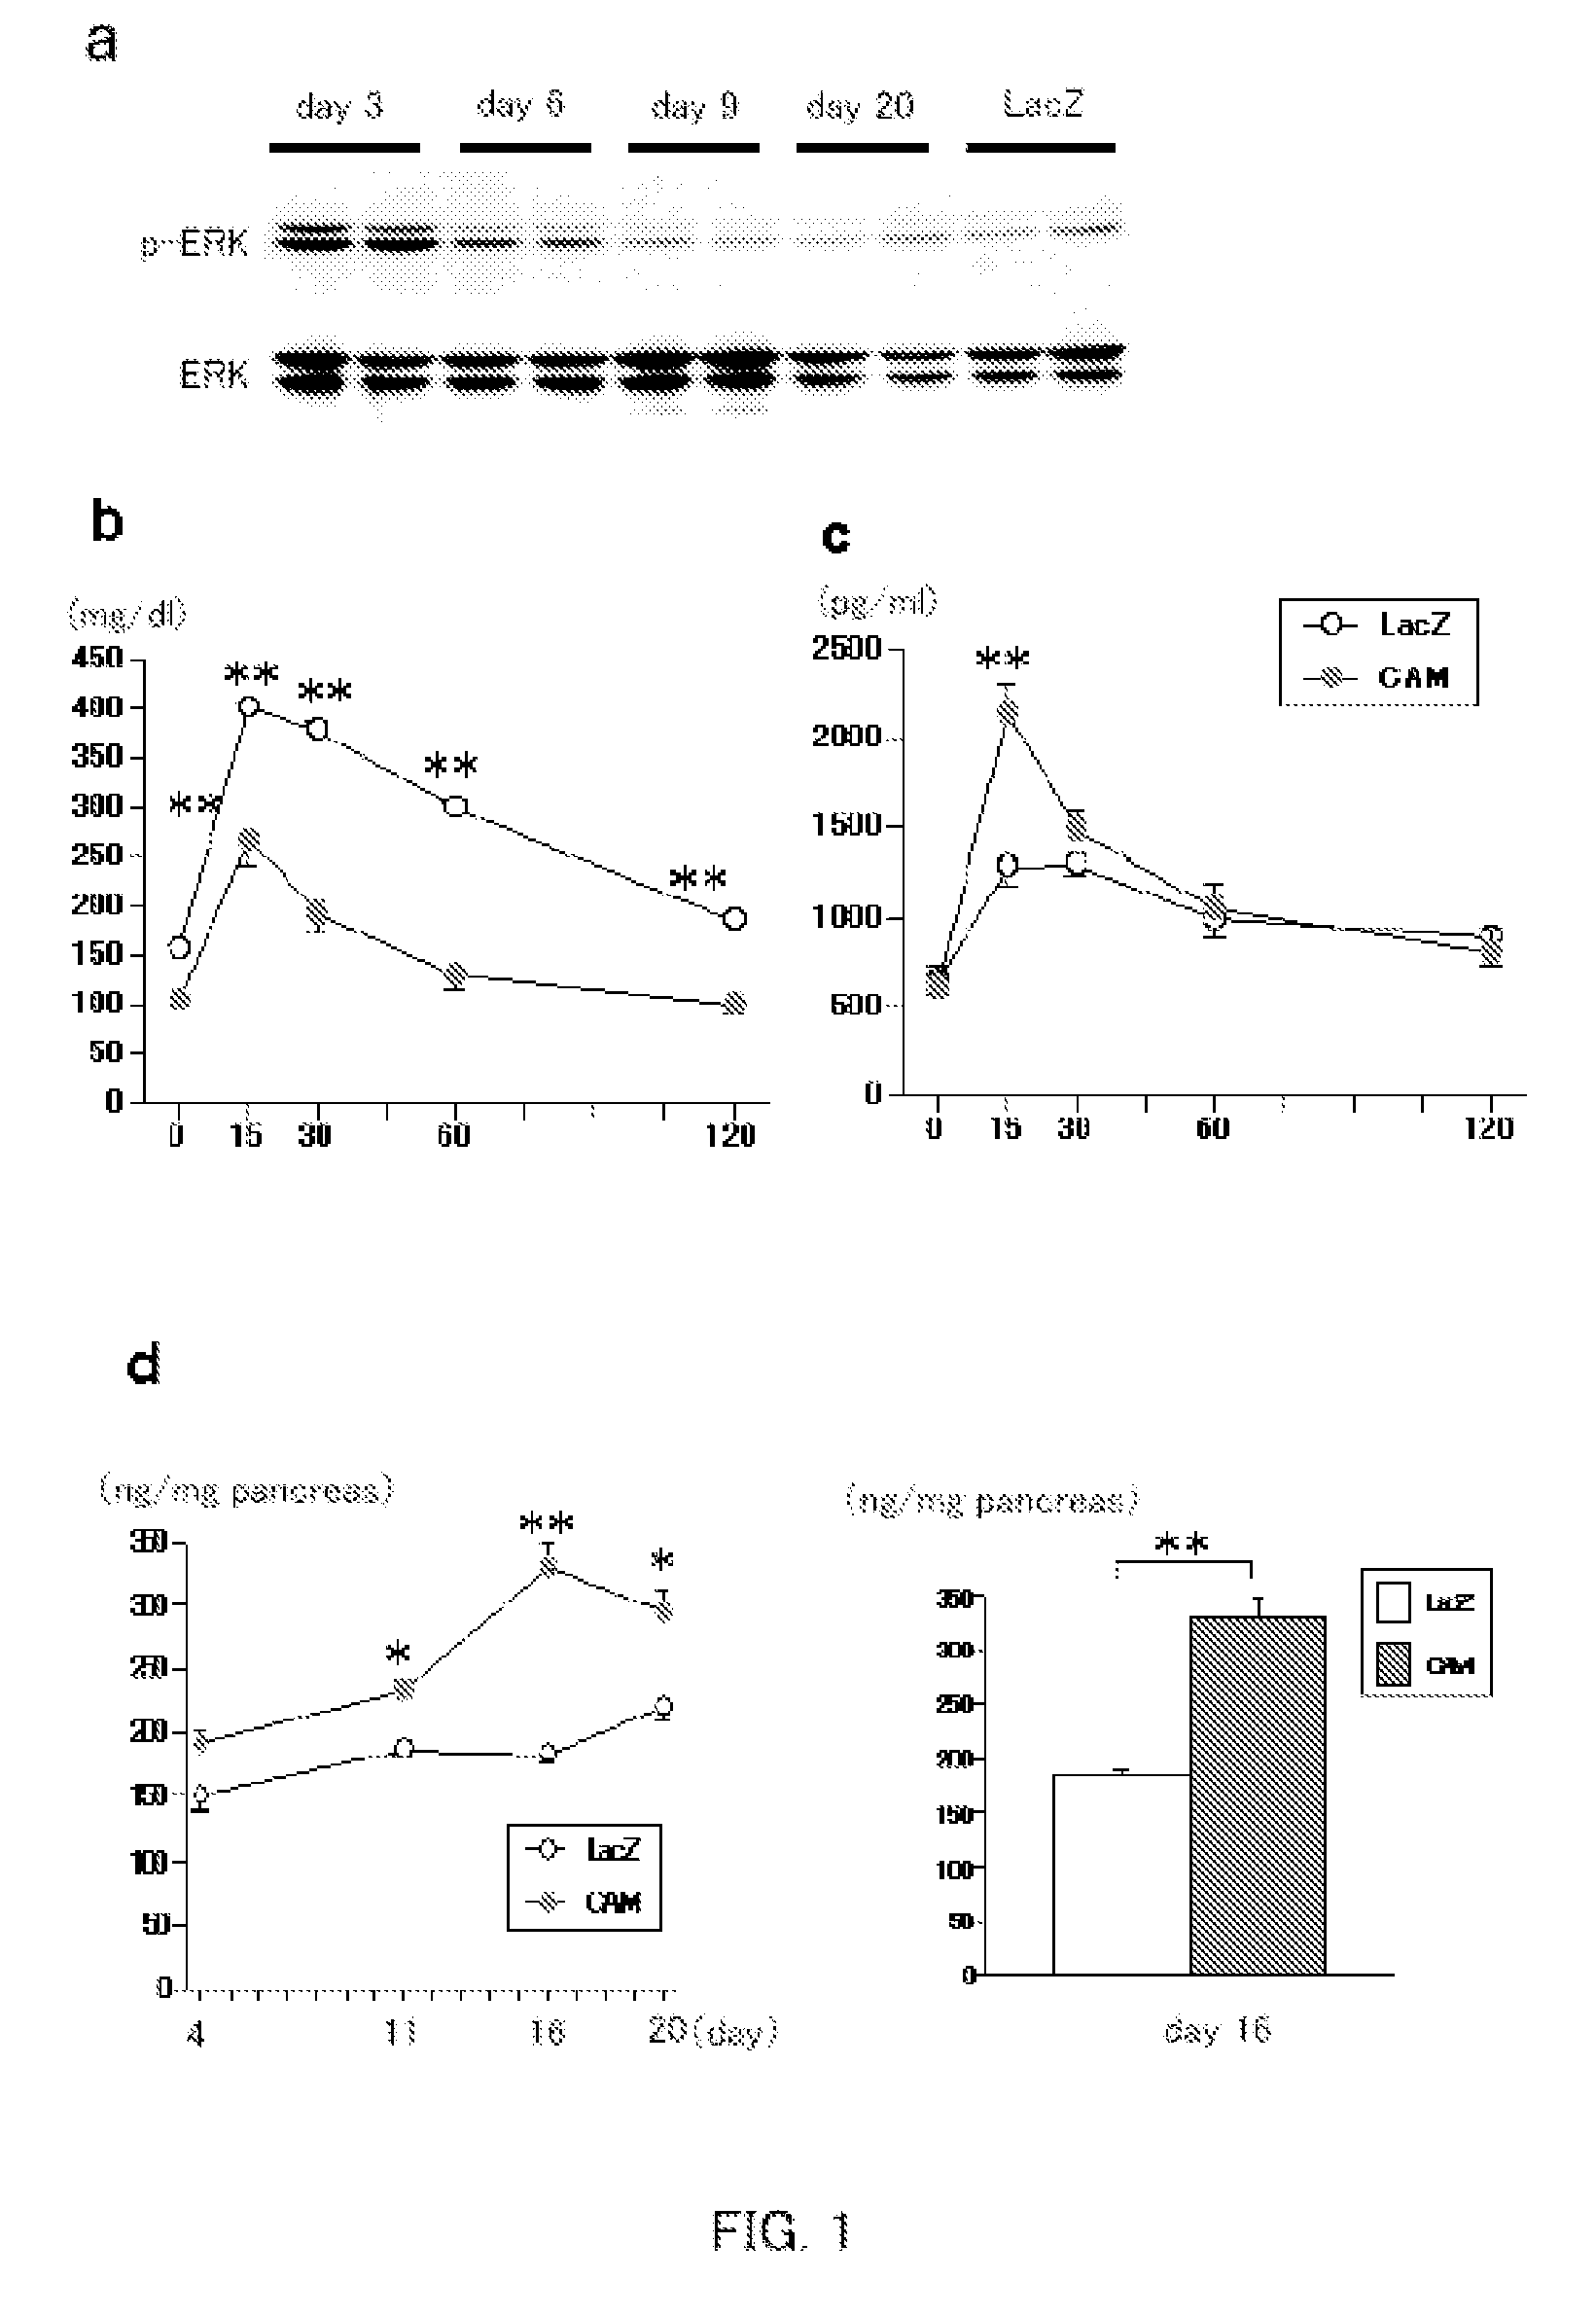 Method for Enhancing Pancreatic Beta Cell Proliferation, Increasing Serum Insulin Concentration, Decreasing Blood Glucose Concentration And Treating And/Or Preventing Diabetes